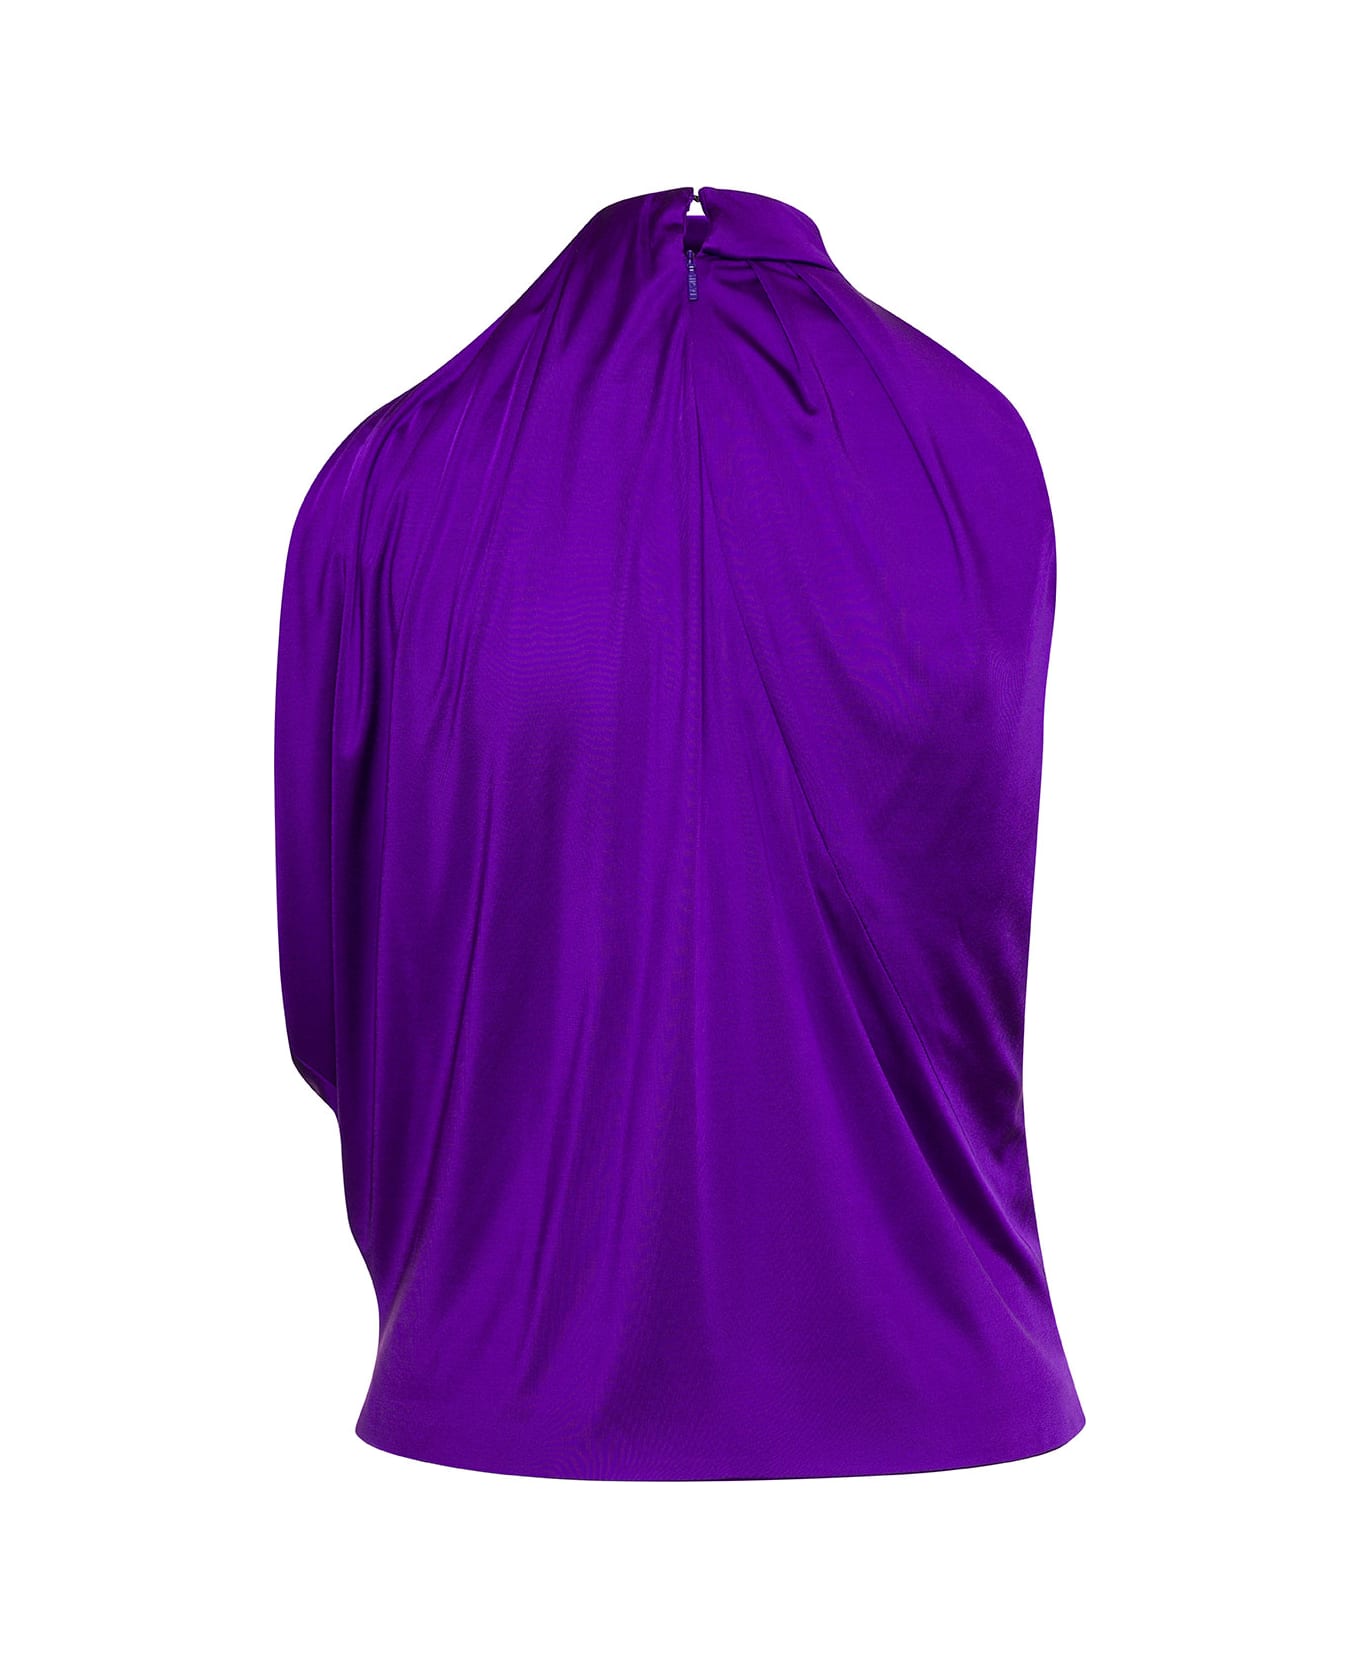 Versace Purple Halterneck Top With Diagonal Cut-out In Viscose Woman - Violet